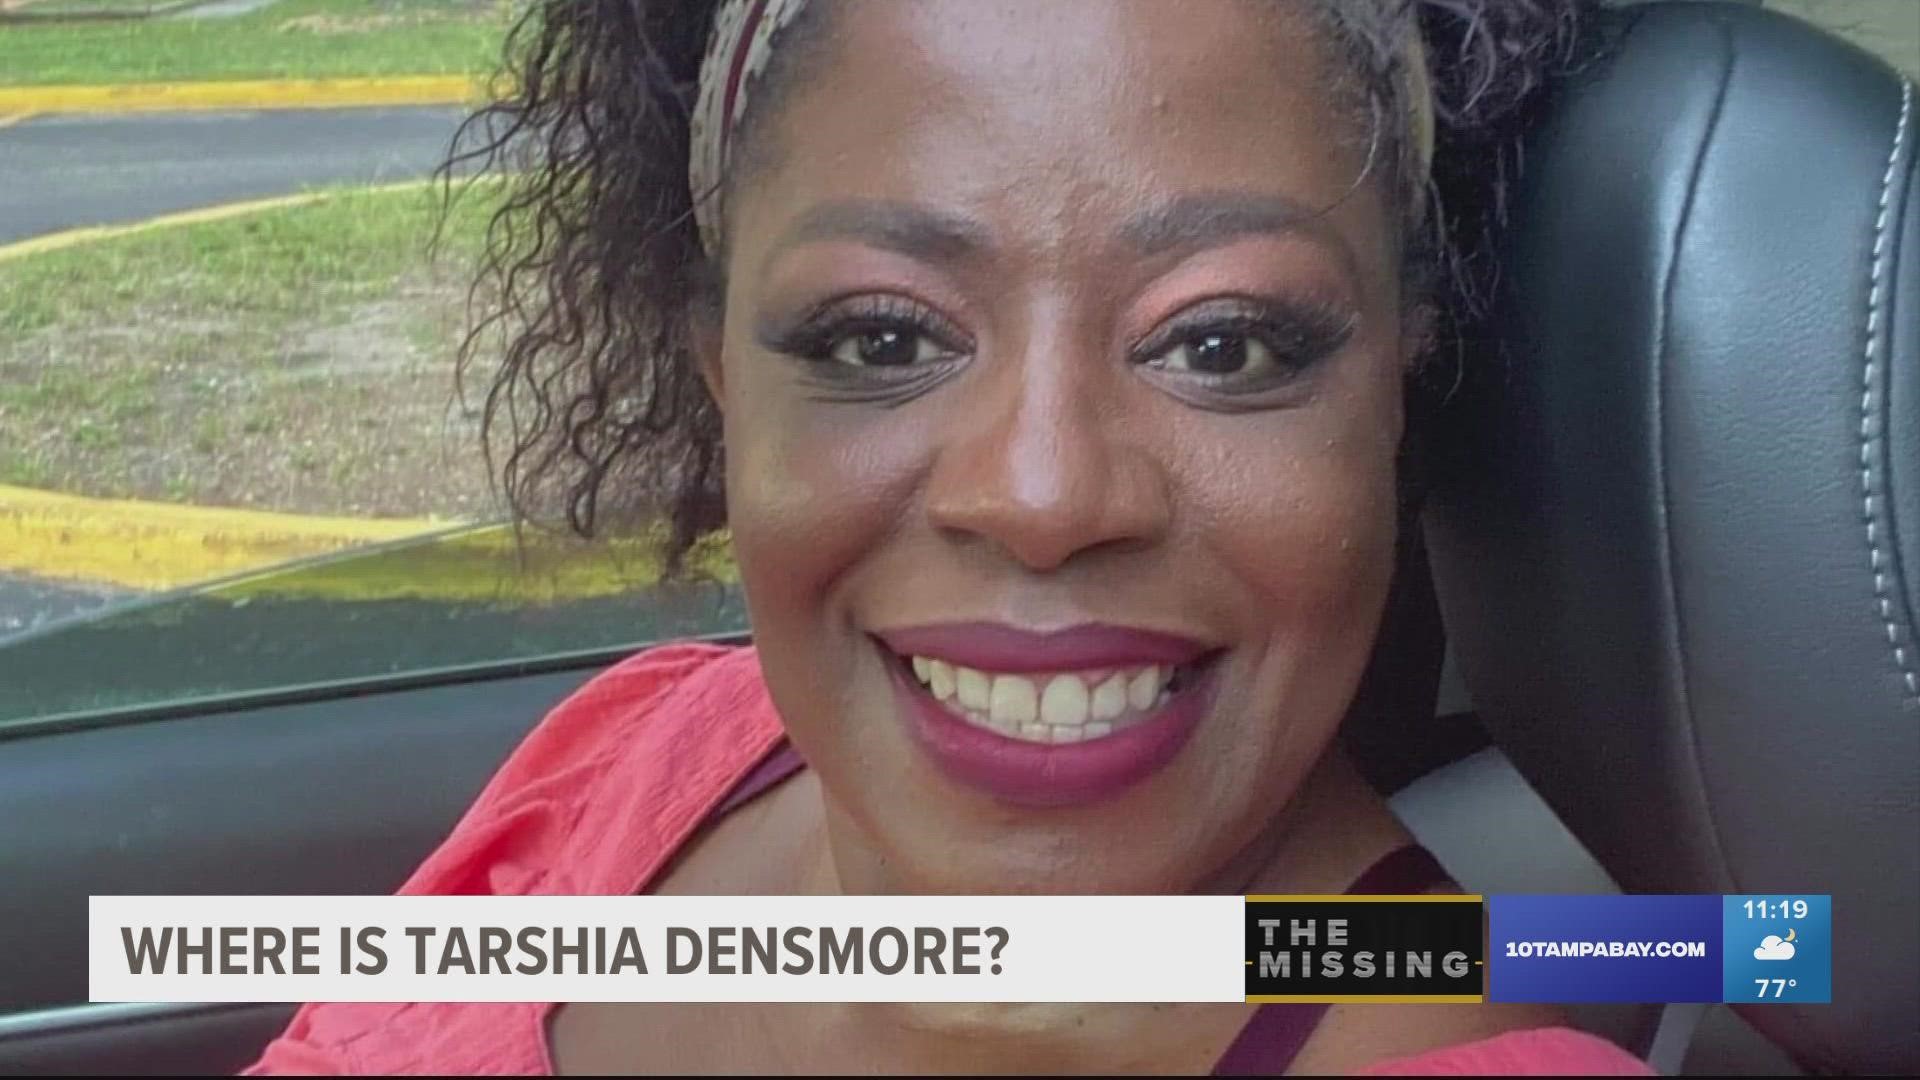 The 48-year-old grandmother was last seen leaving her Clearwater apartment on Oct. 5.